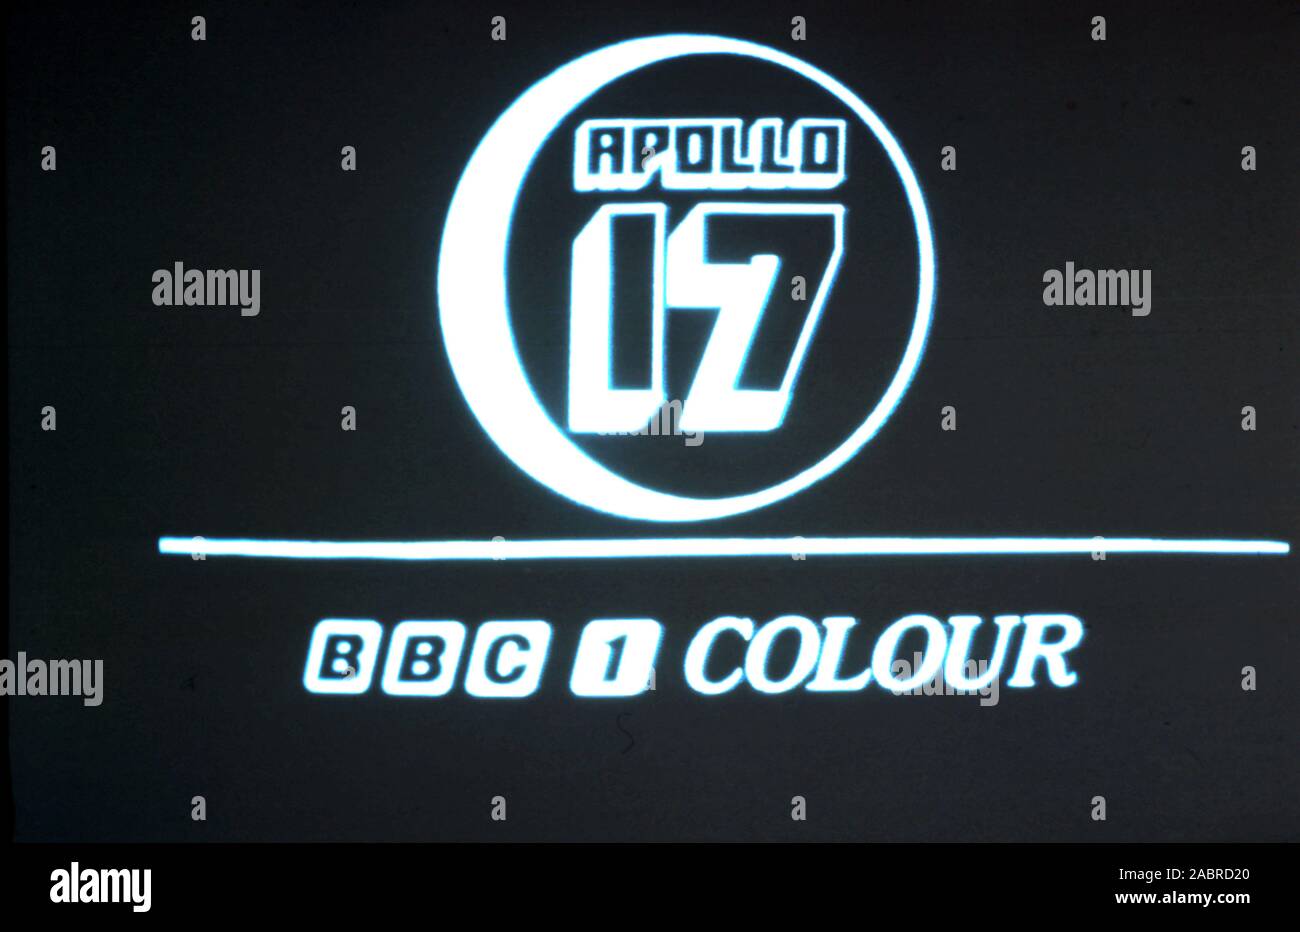 Teleclip - BBC 1 Colour Apollo 17 - taken directly from TV screen during live broadcast in the UK - 1972 Stock Photo